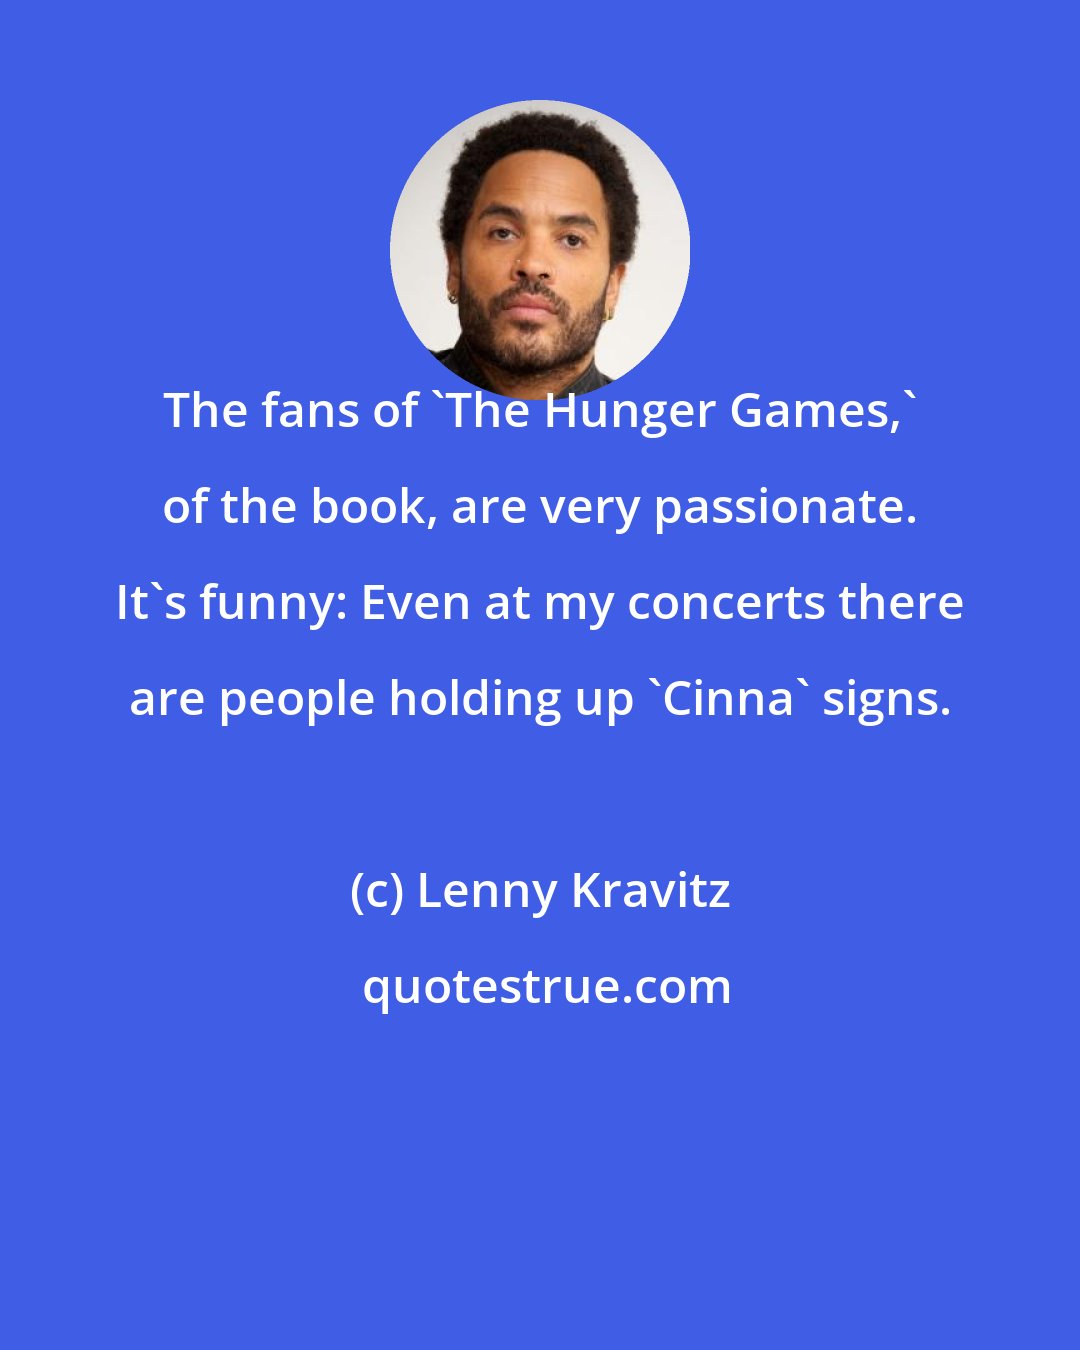 Lenny Kravitz: The fans of 'The Hunger Games,' of the book, are very passionate. It's funny: Even at my concerts there are people holding up 'Cinna' signs.